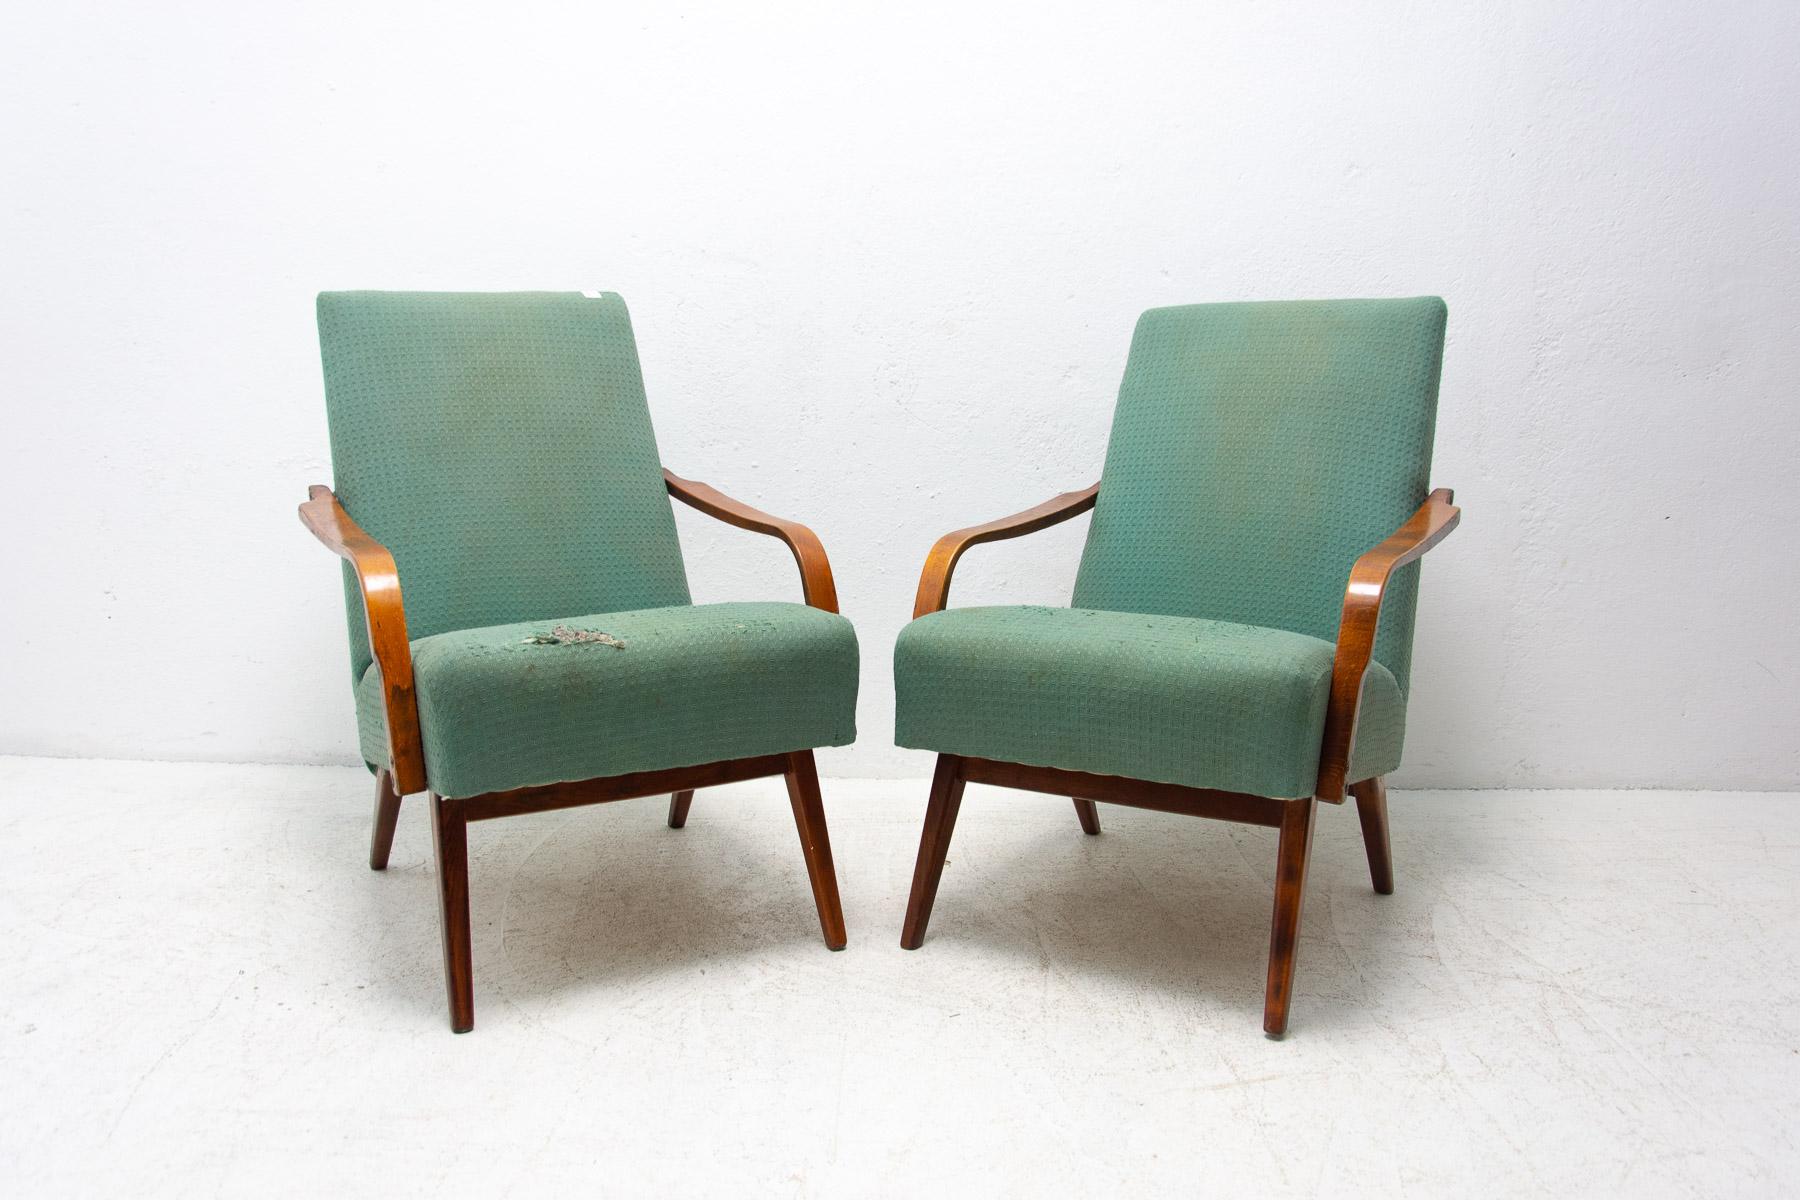 These bentwood armchairs were designed by Jaroslav Šmídek and made in the former Czechoslovakia in the 1960´s.

The chairs are stable and comfortable. They are in good structure condition, the upholstery showing significant signs of age and using